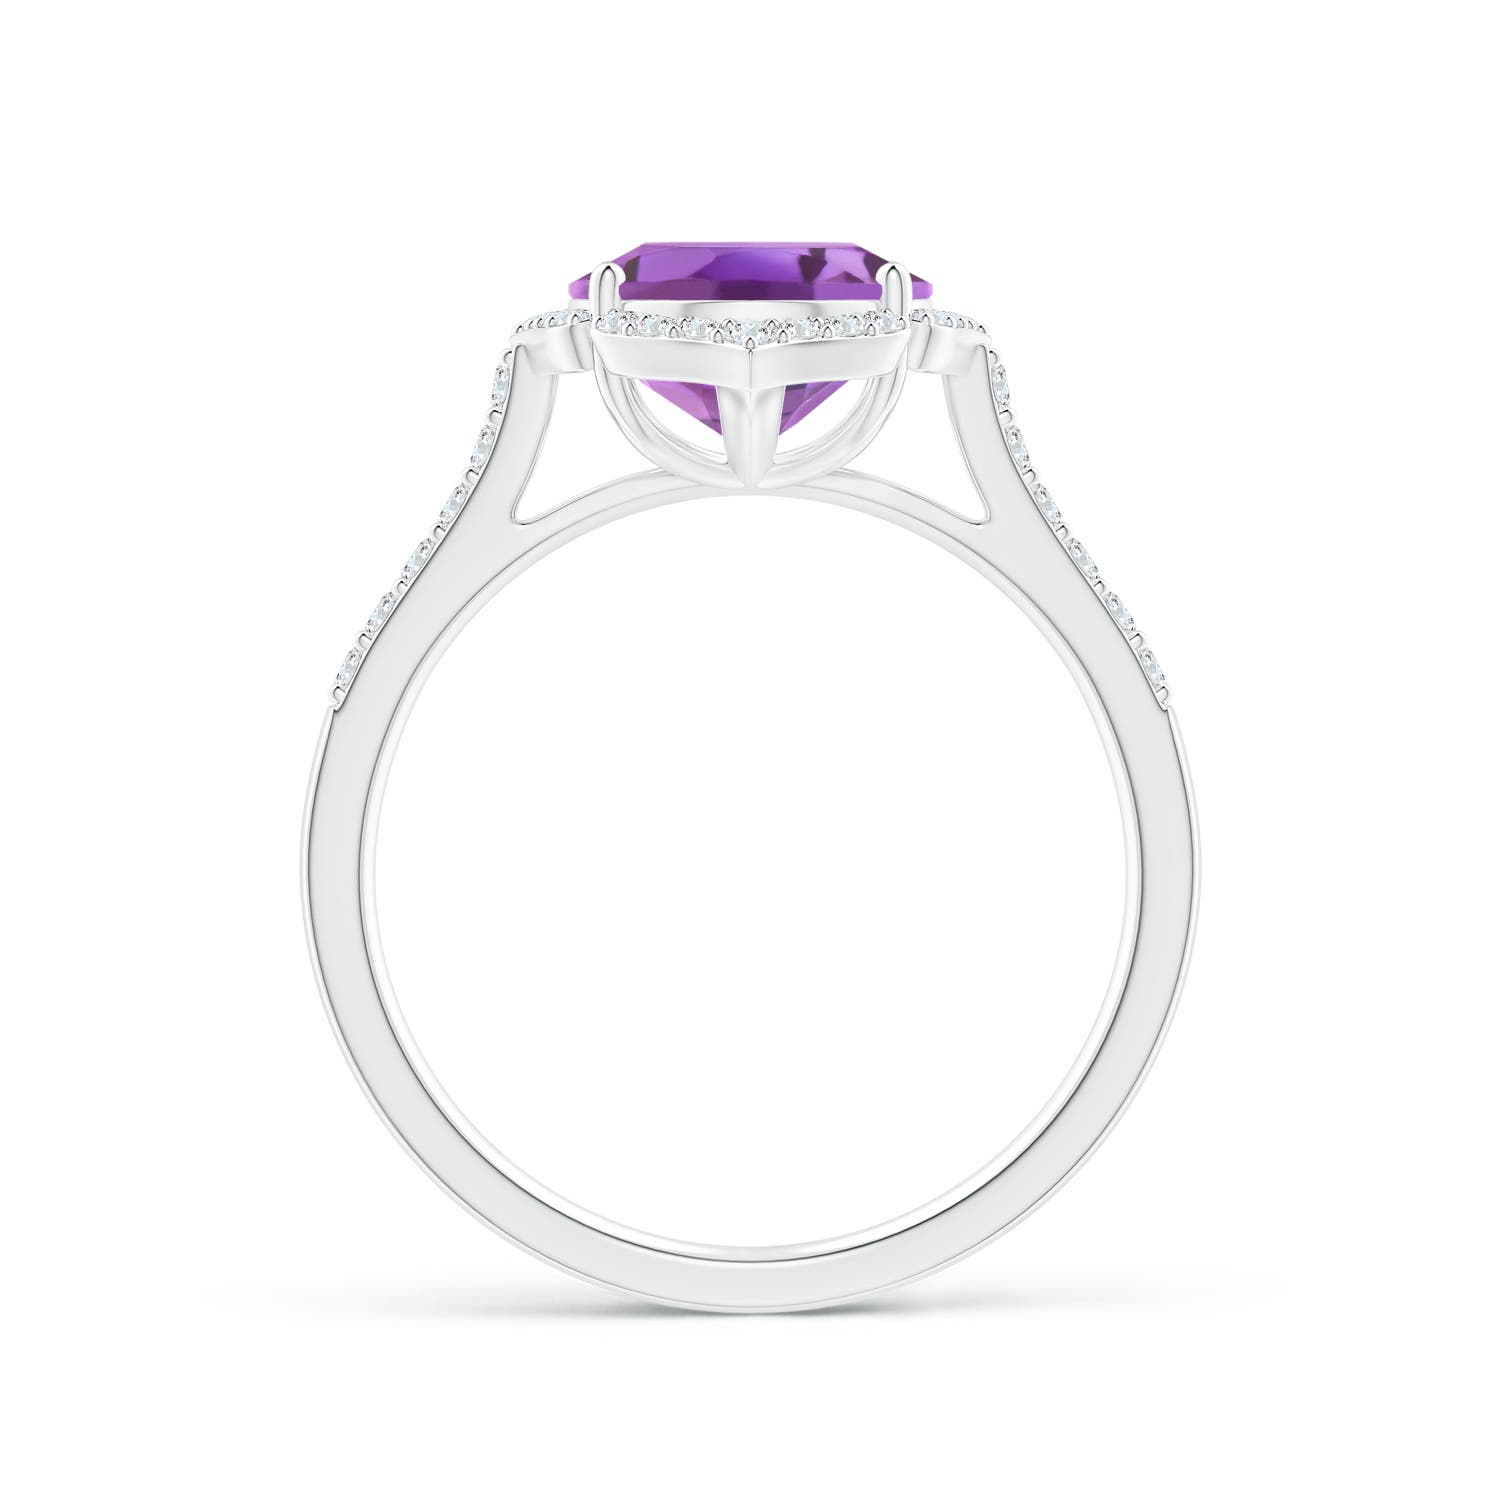 A - Amethyst / 2.51 CT / 14 KT White Gold